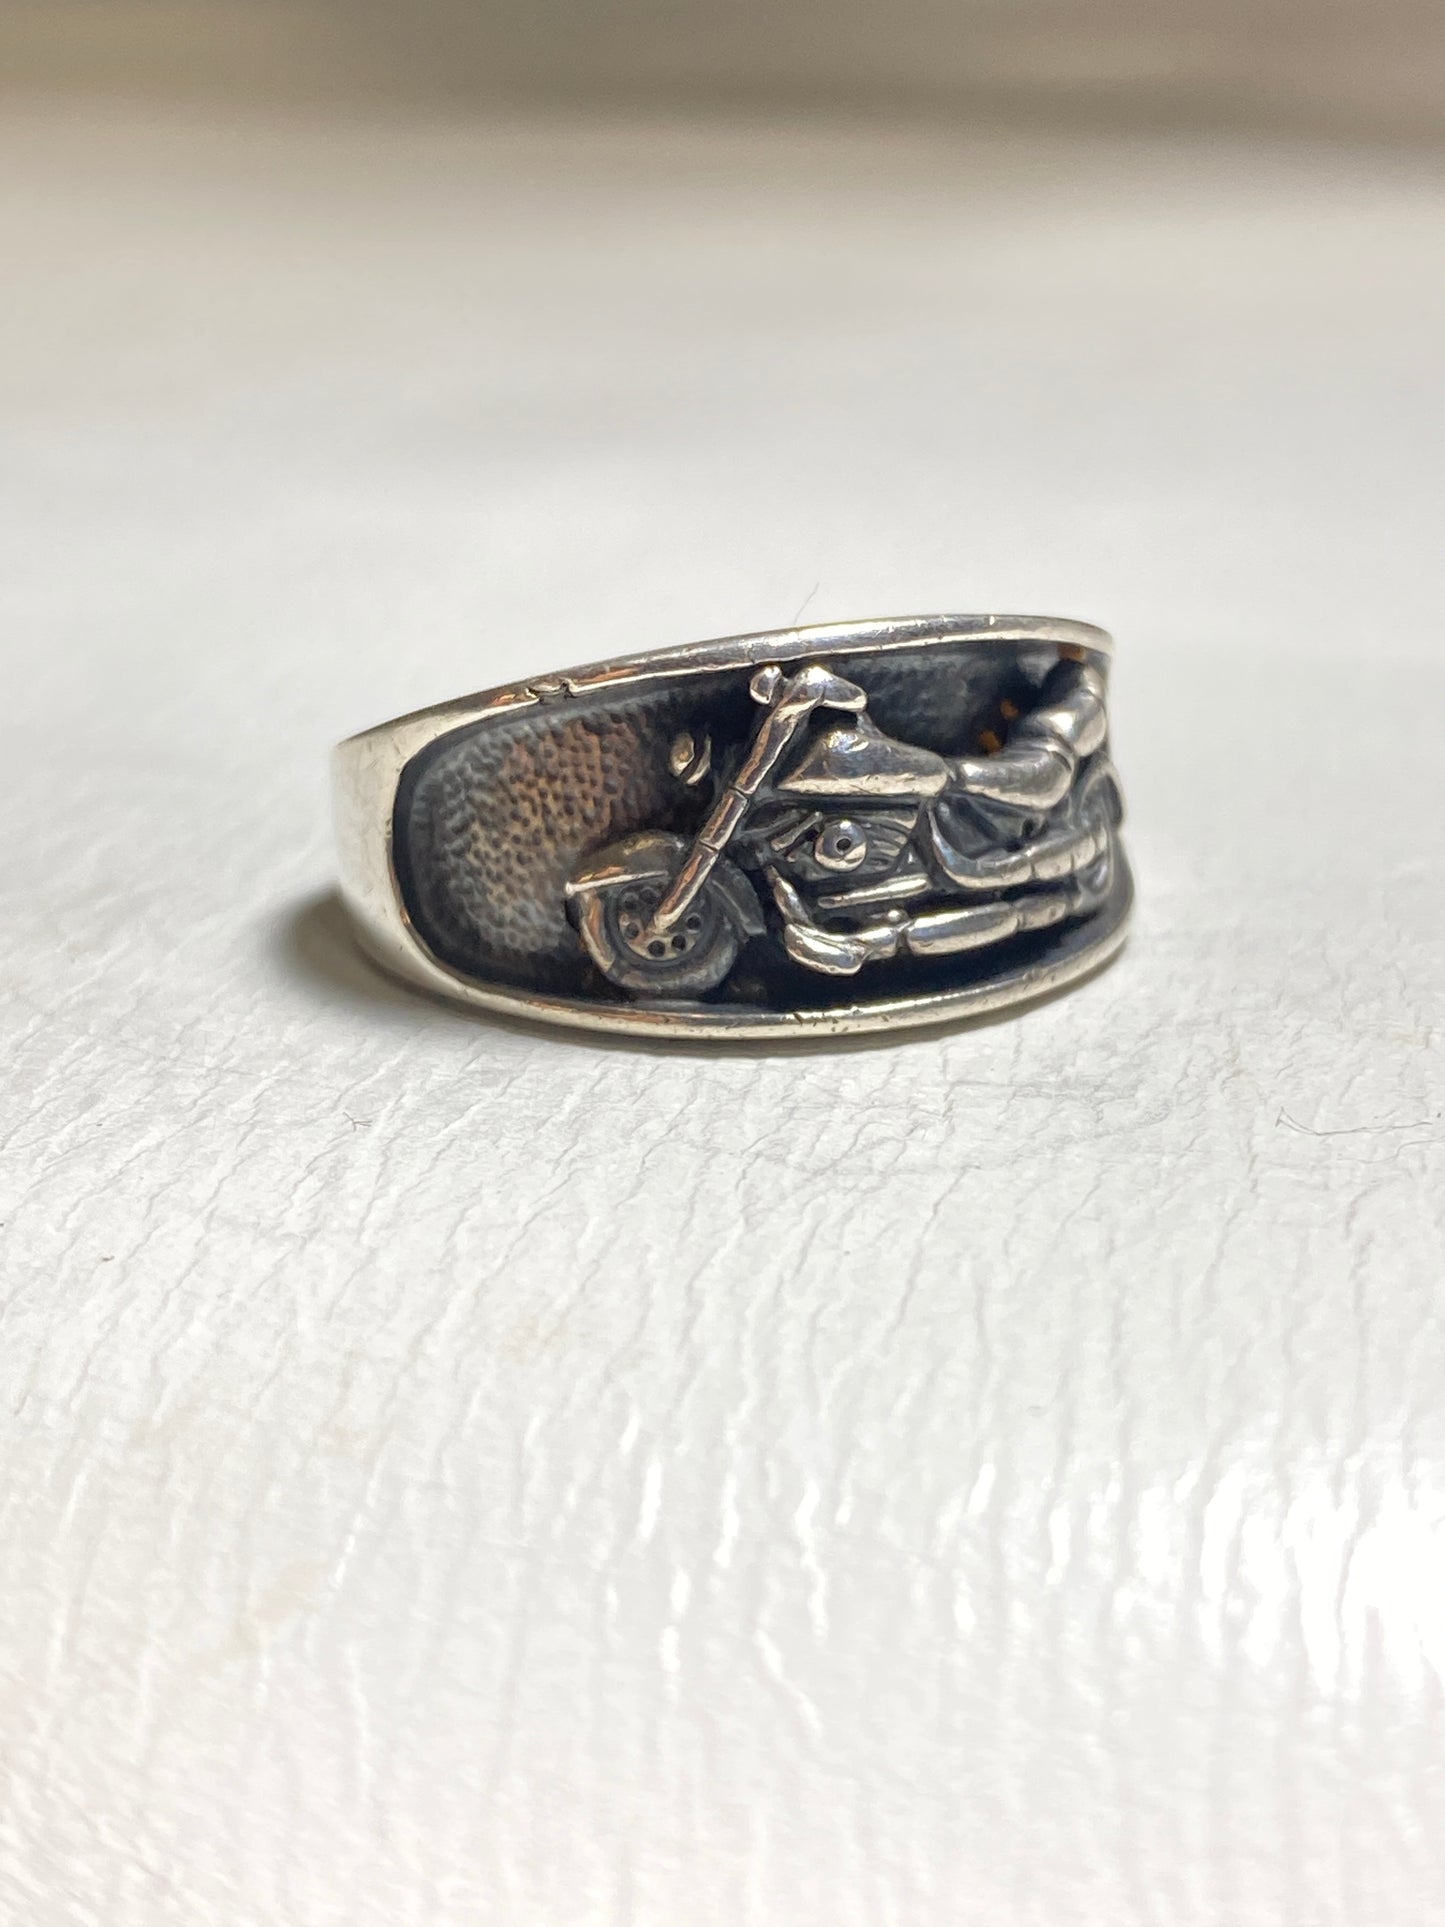 Motorcycle ring biker band sterling silver by Ott